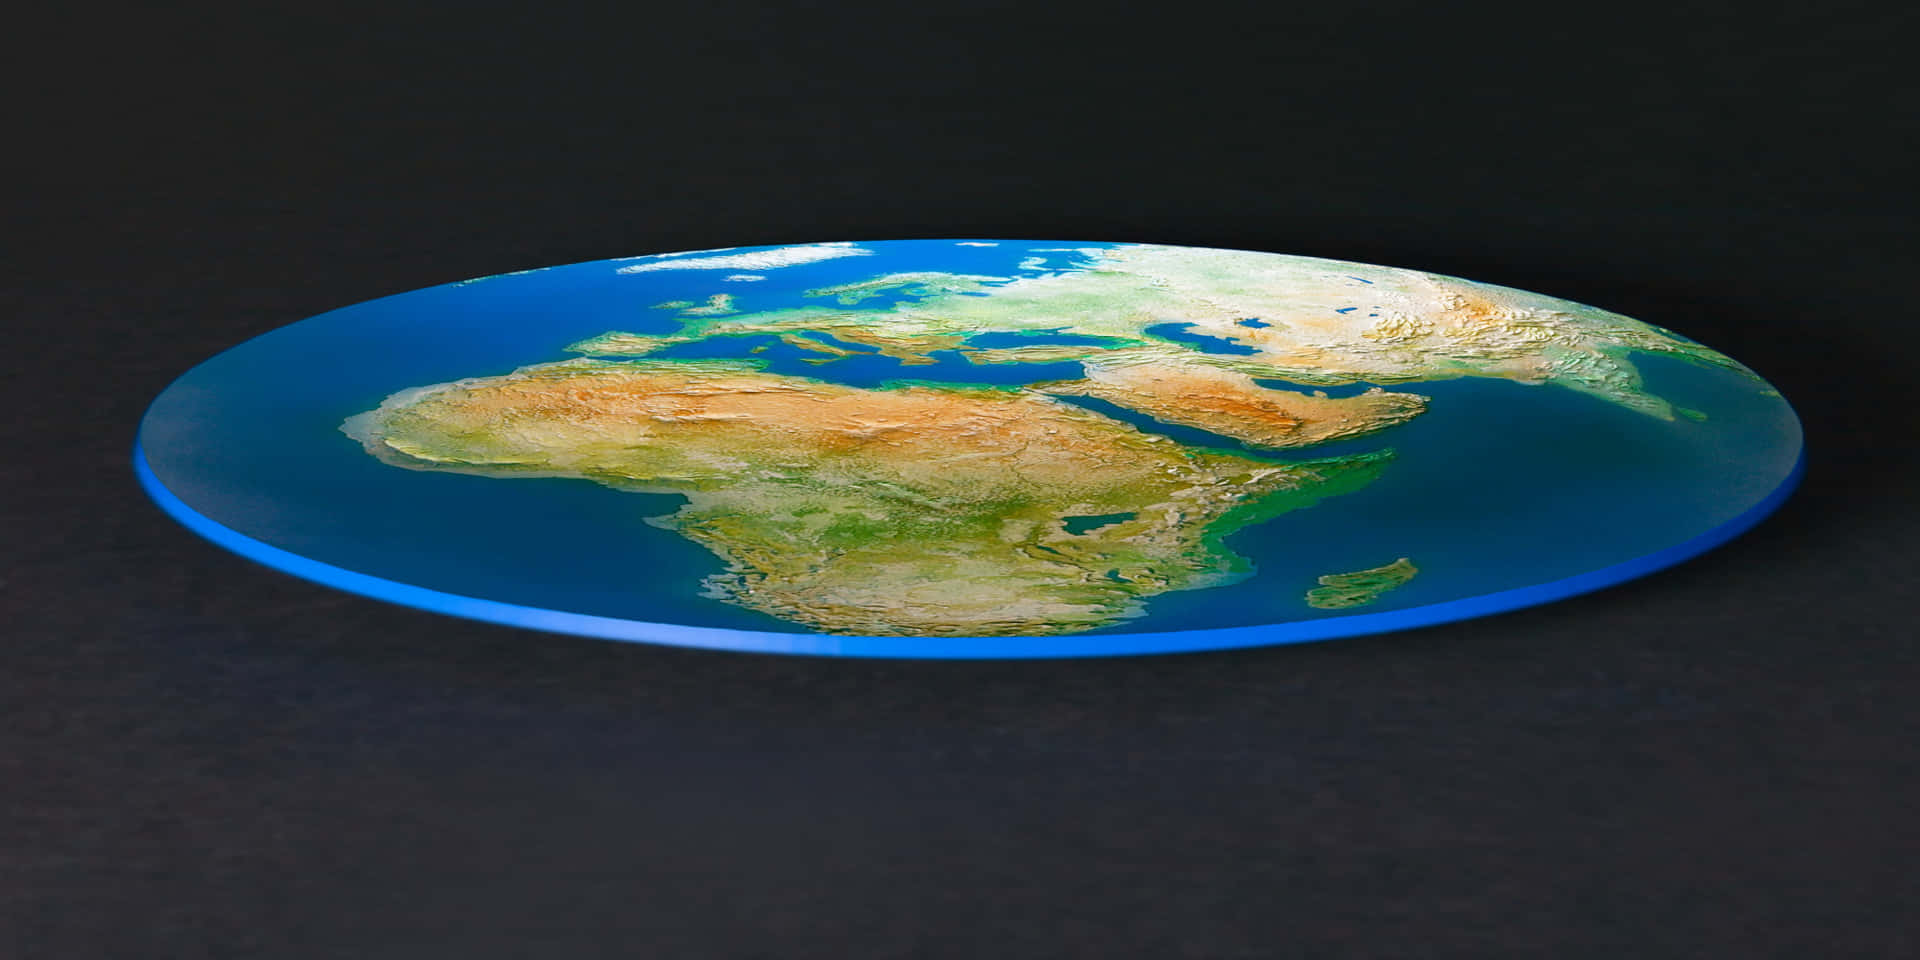 A View of the Flat Earth